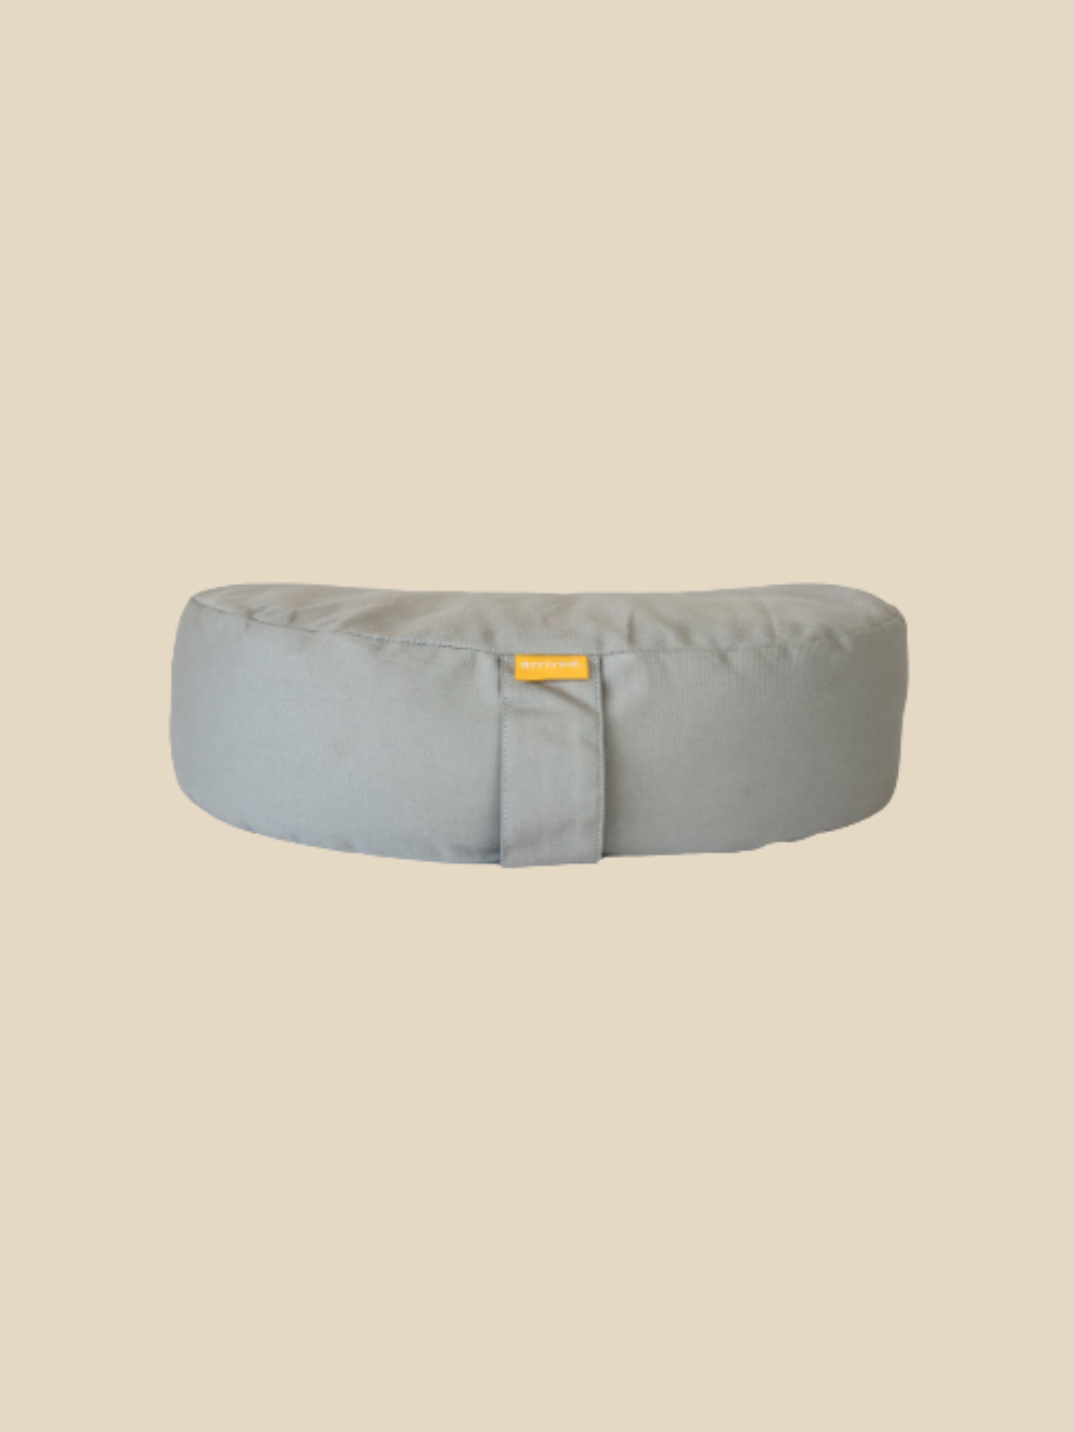 half moon meditation cushion stylish home goods shop sustainable brands eco-friendly home goods ethically-made neutral colors Arrived women-owned brand. The Half Moon meditation cushion lifts your hips and allows them to roll slightly forward, helping to support the natural curve of your lower back. Aligning your spine allows the rest of your body to follow naturally. grey color